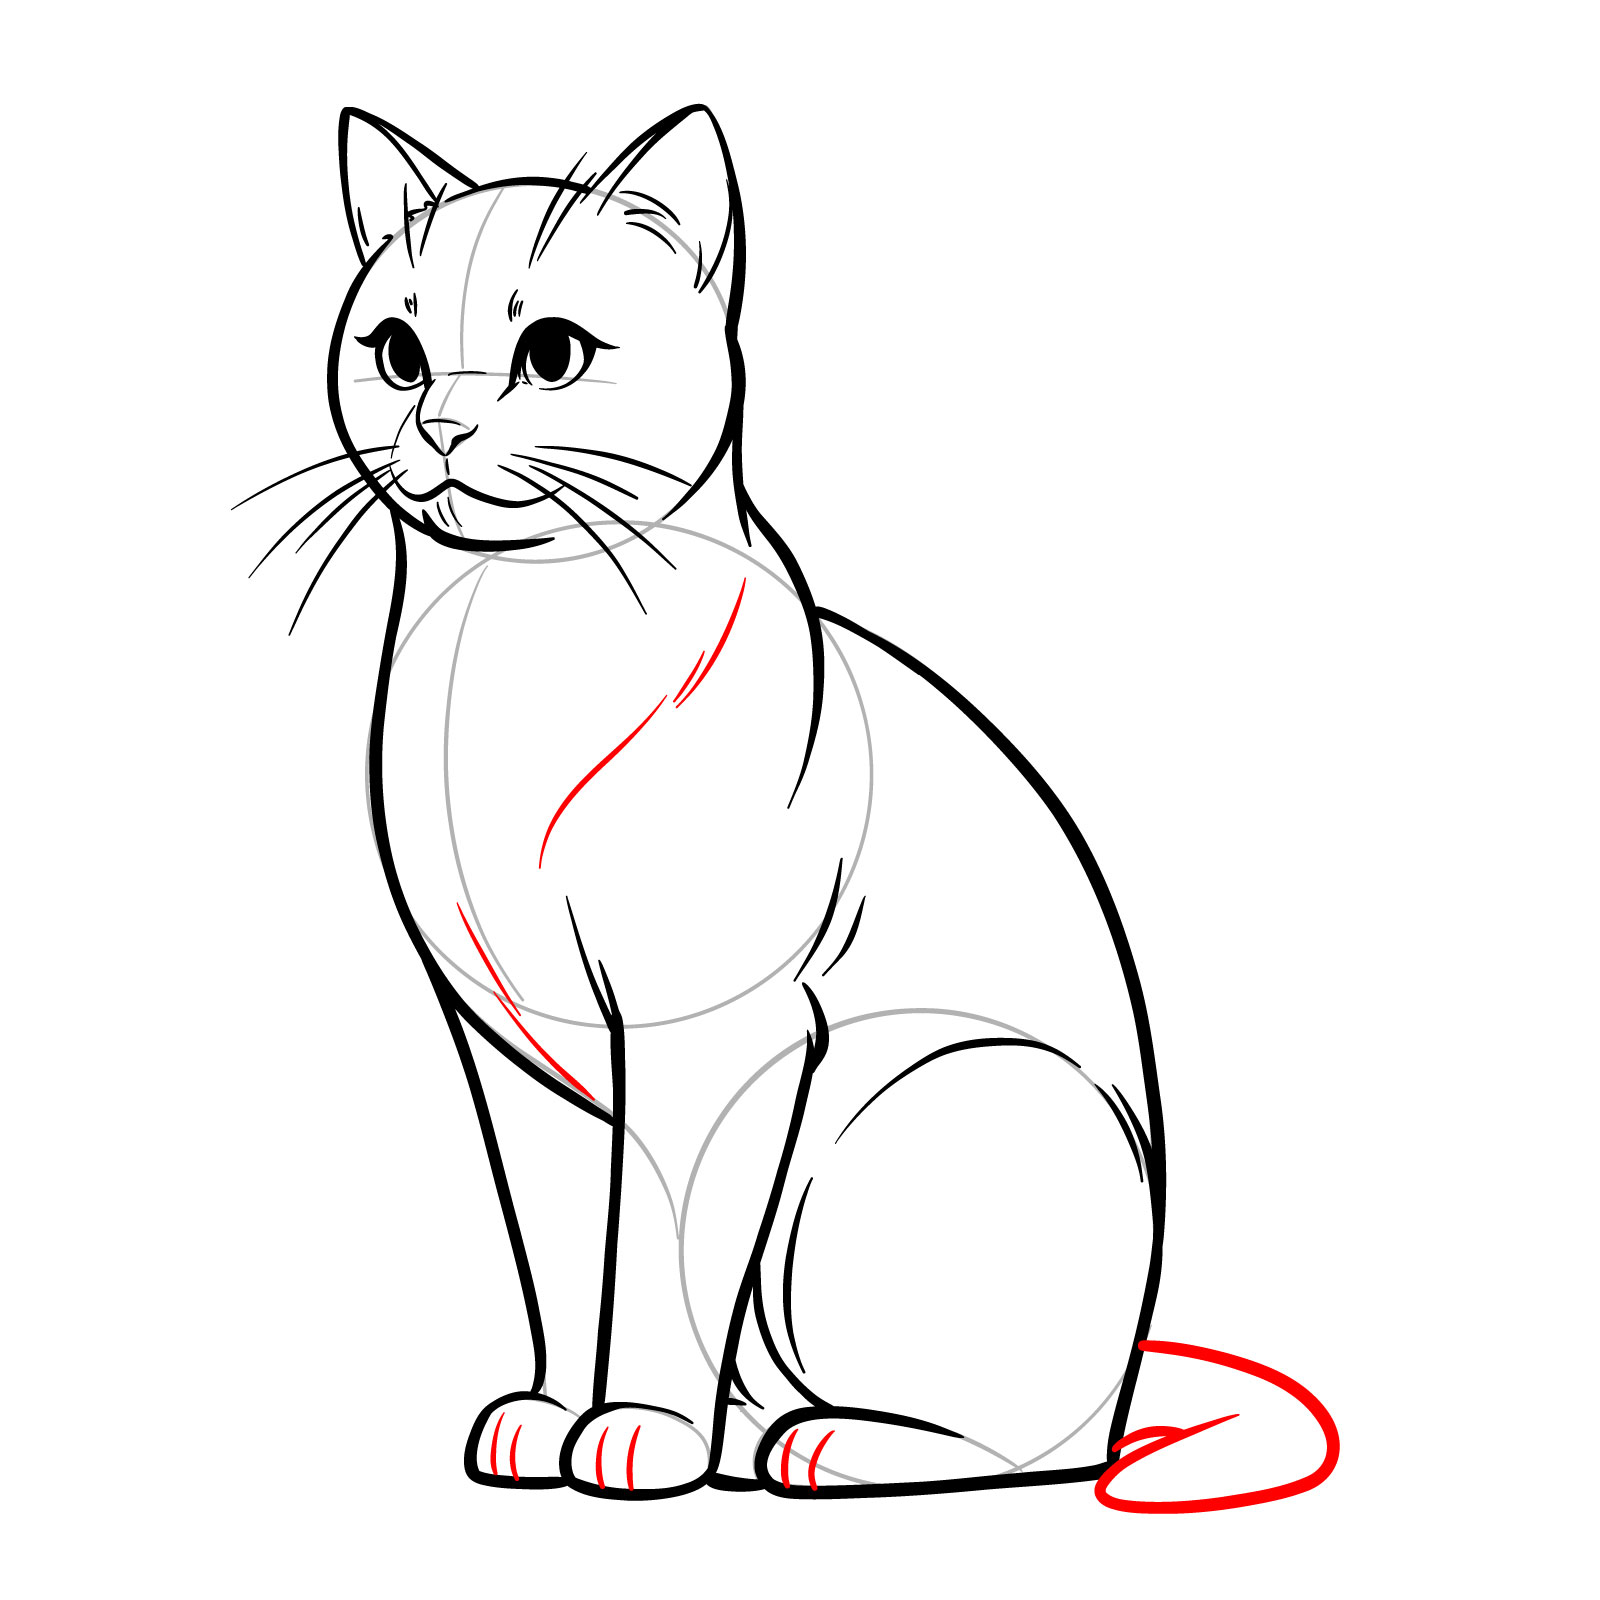 Detailed drawing of a cat's tail and fur texture, with paw separation - step 12